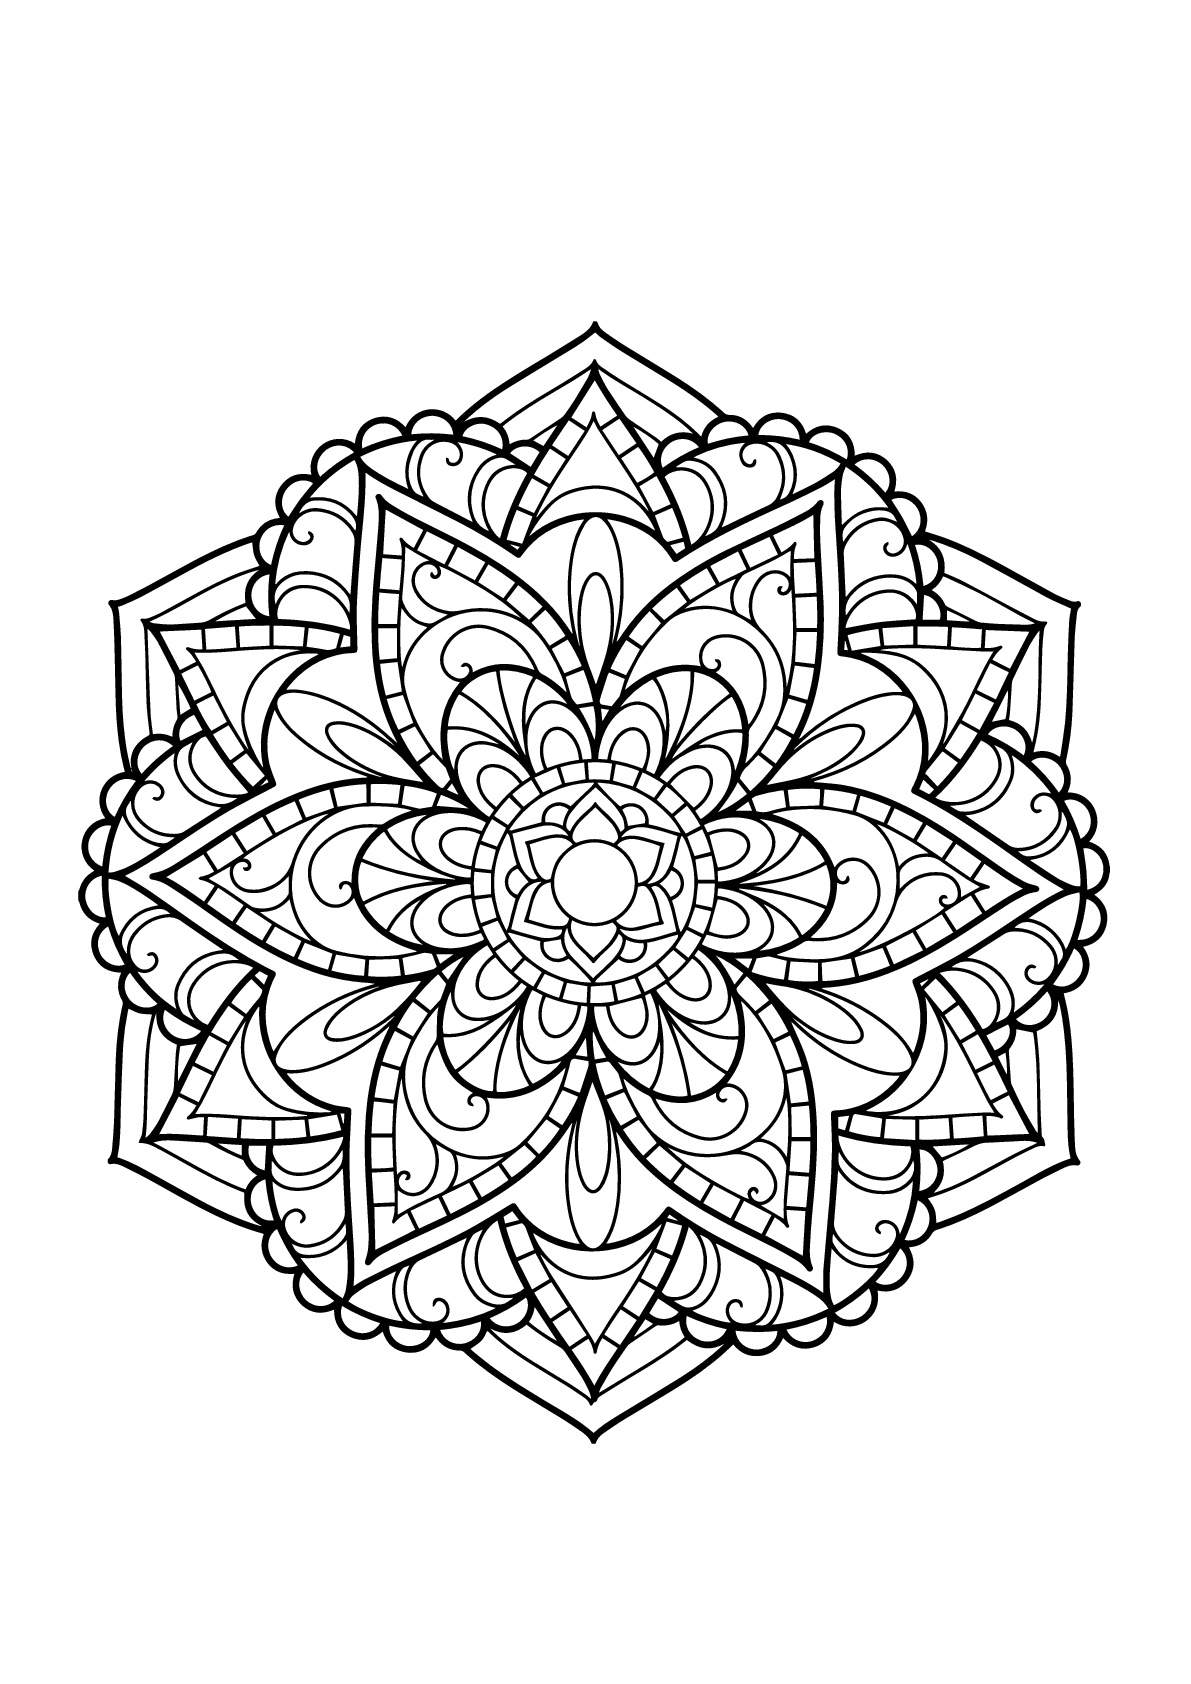 Mandala from a free adult coloring book - Mandalas Adult Coloring Pages